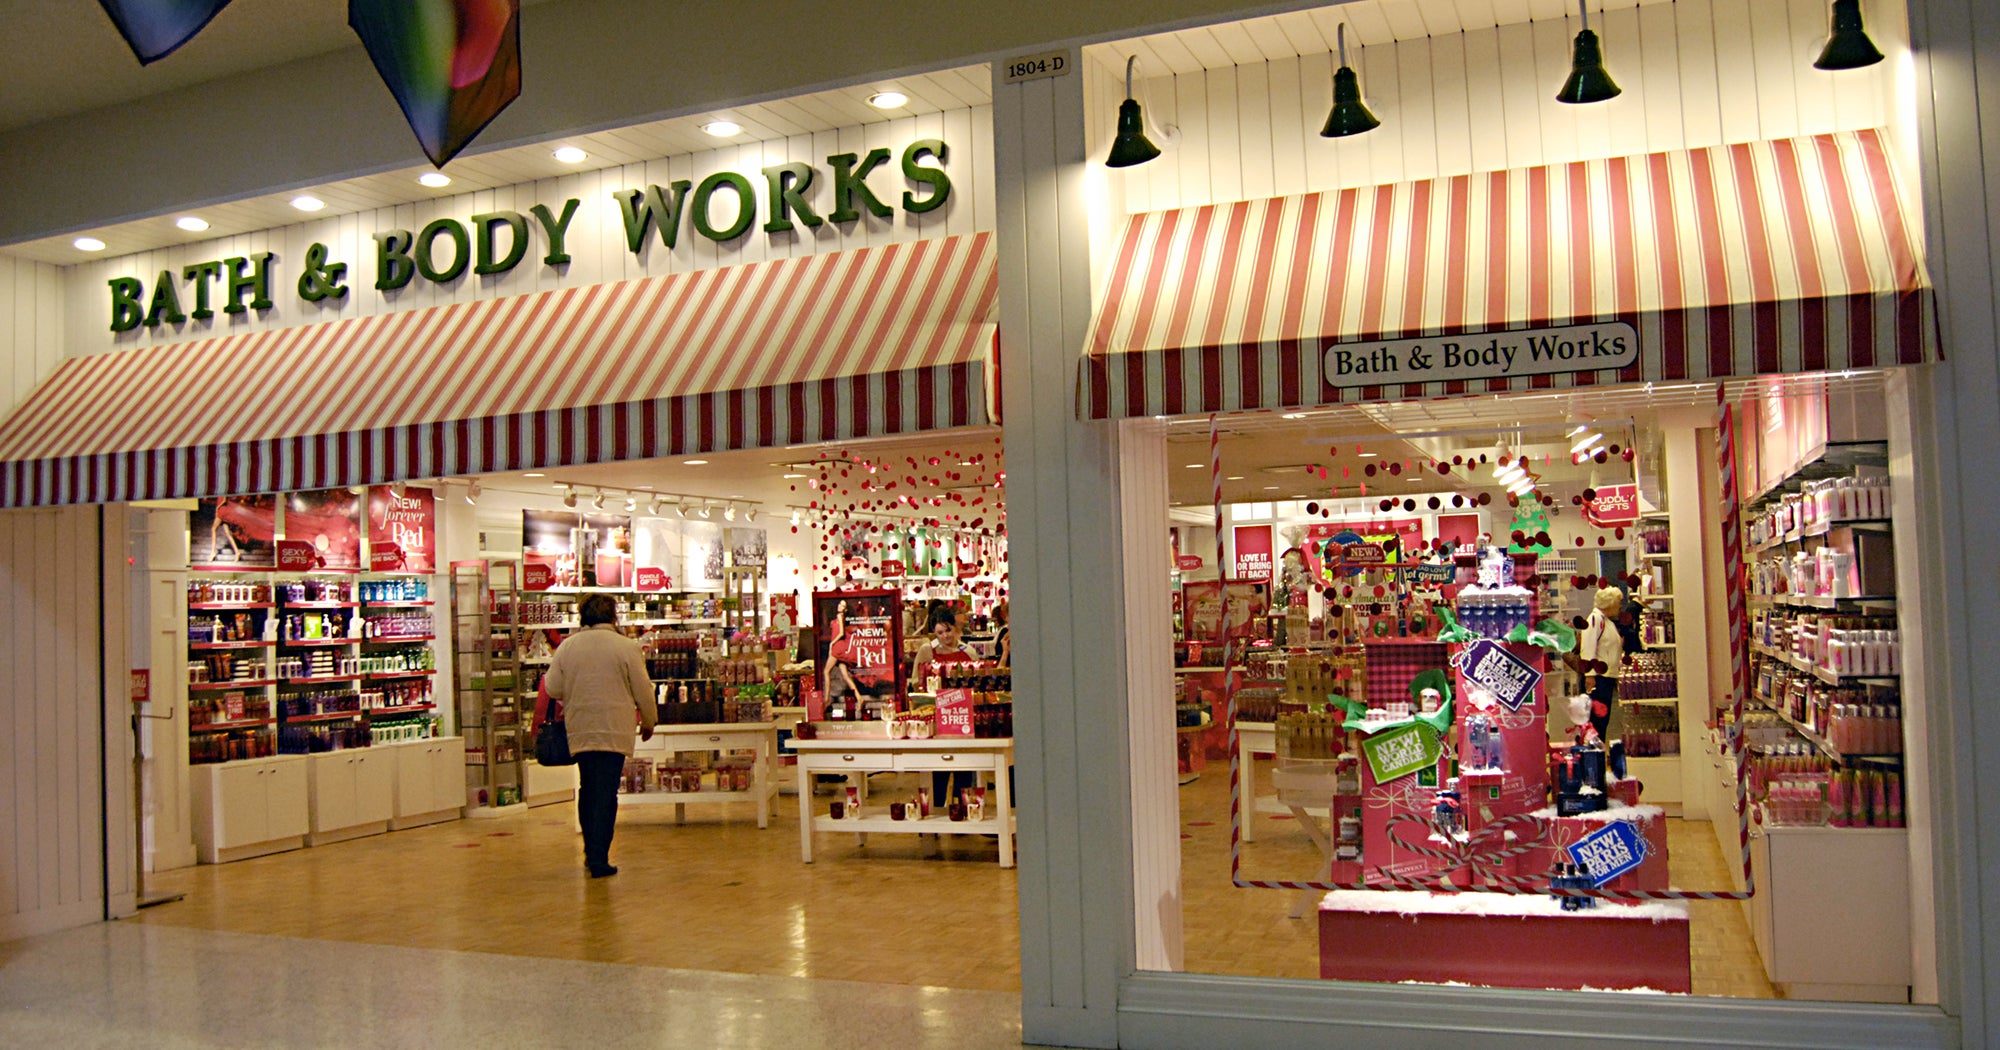 bath and body works schedule